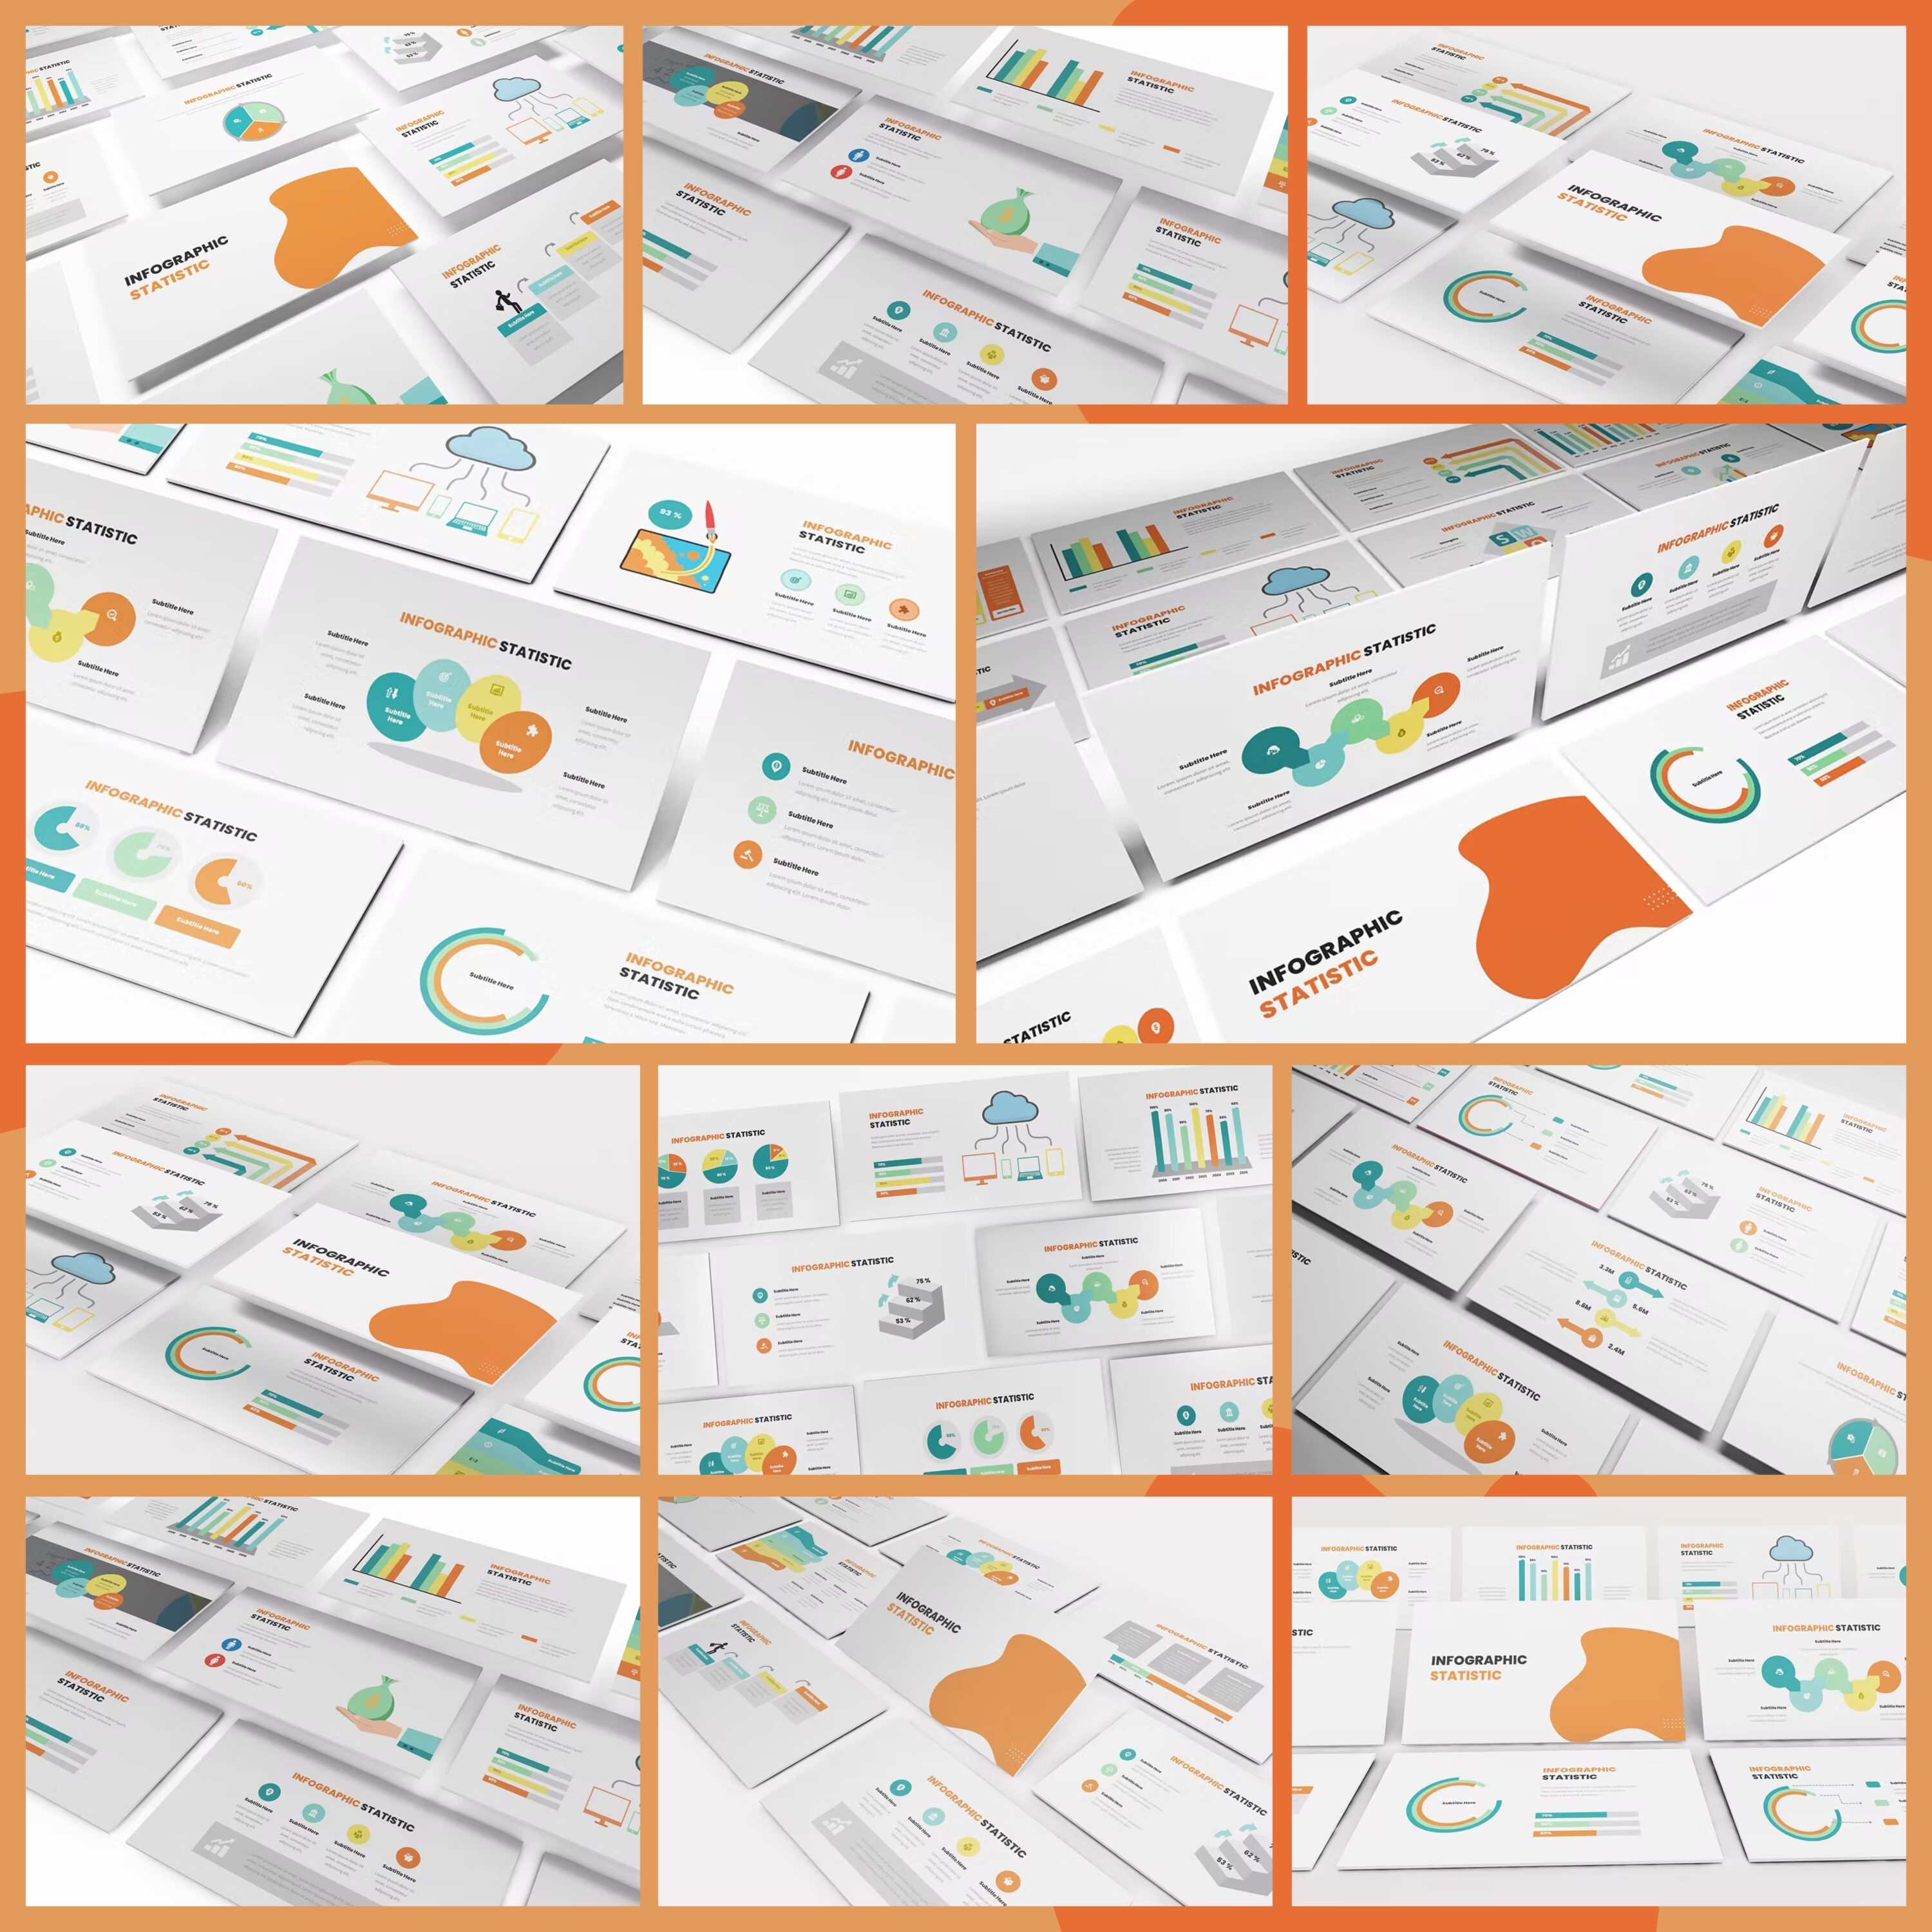 Statistic Infographic Powerpoint Template from Formatika.